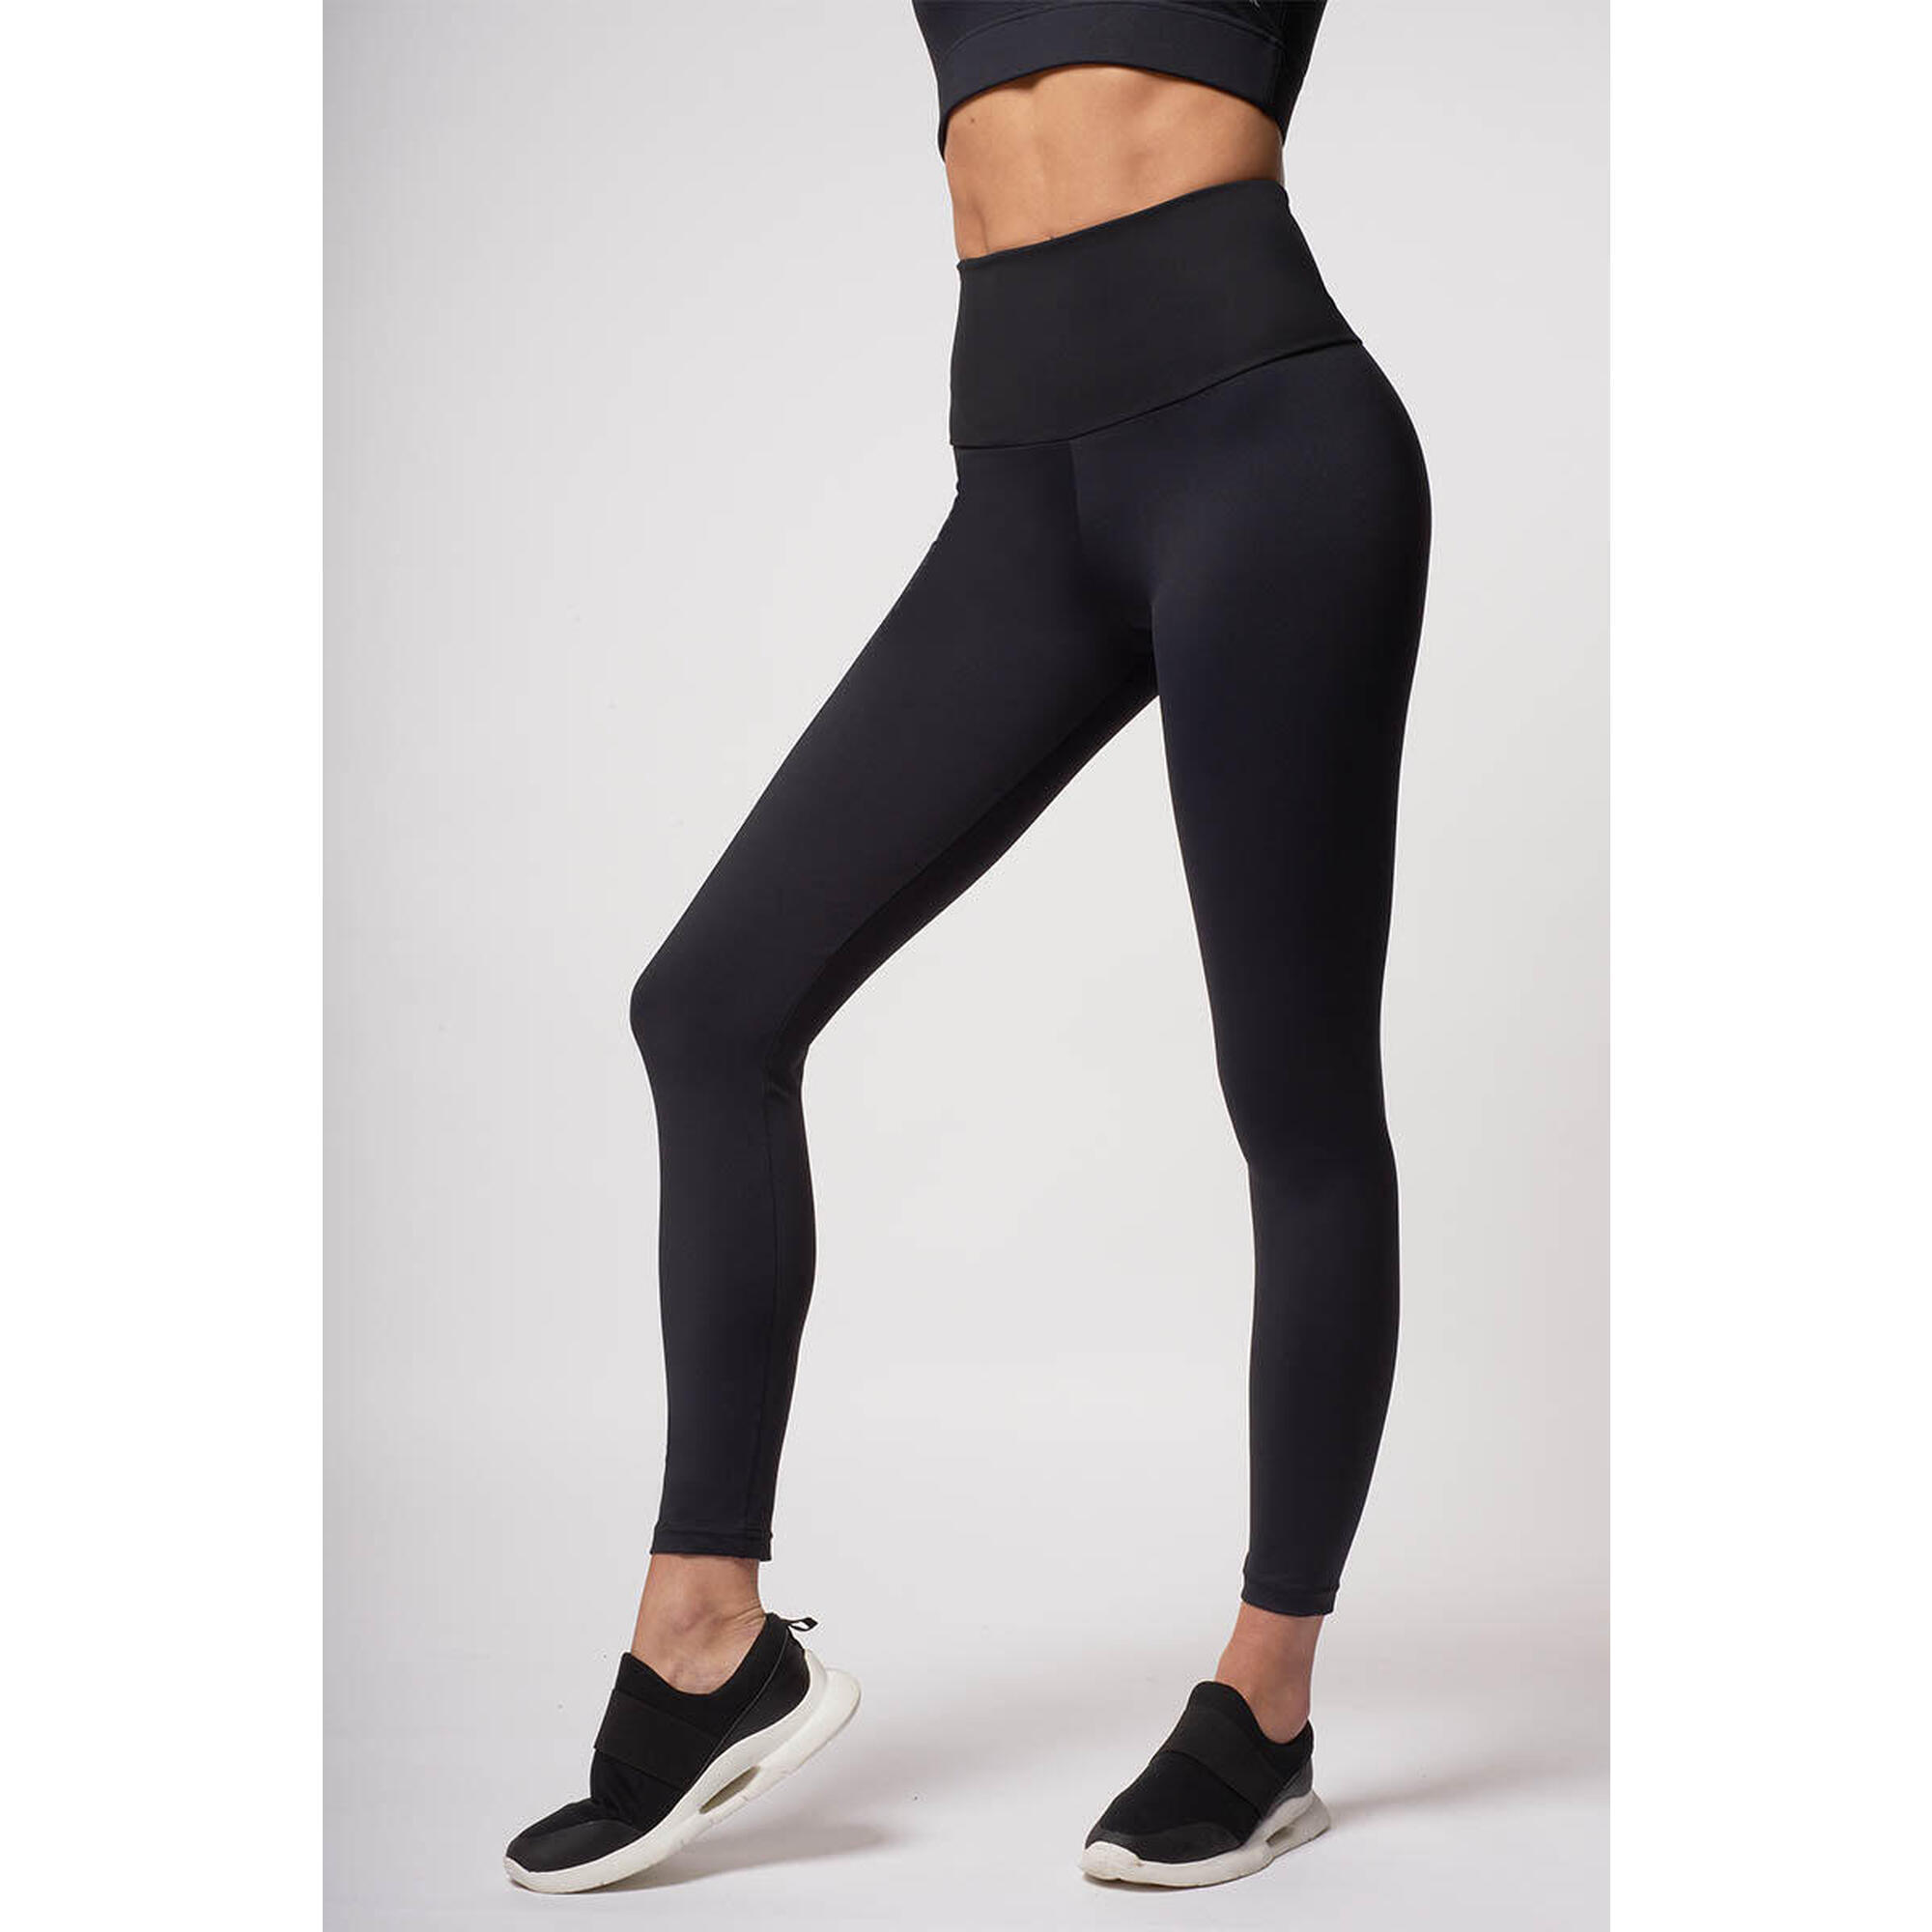 Buy Mountain Warehouse Black Womens Brushed Thermal Leggings from